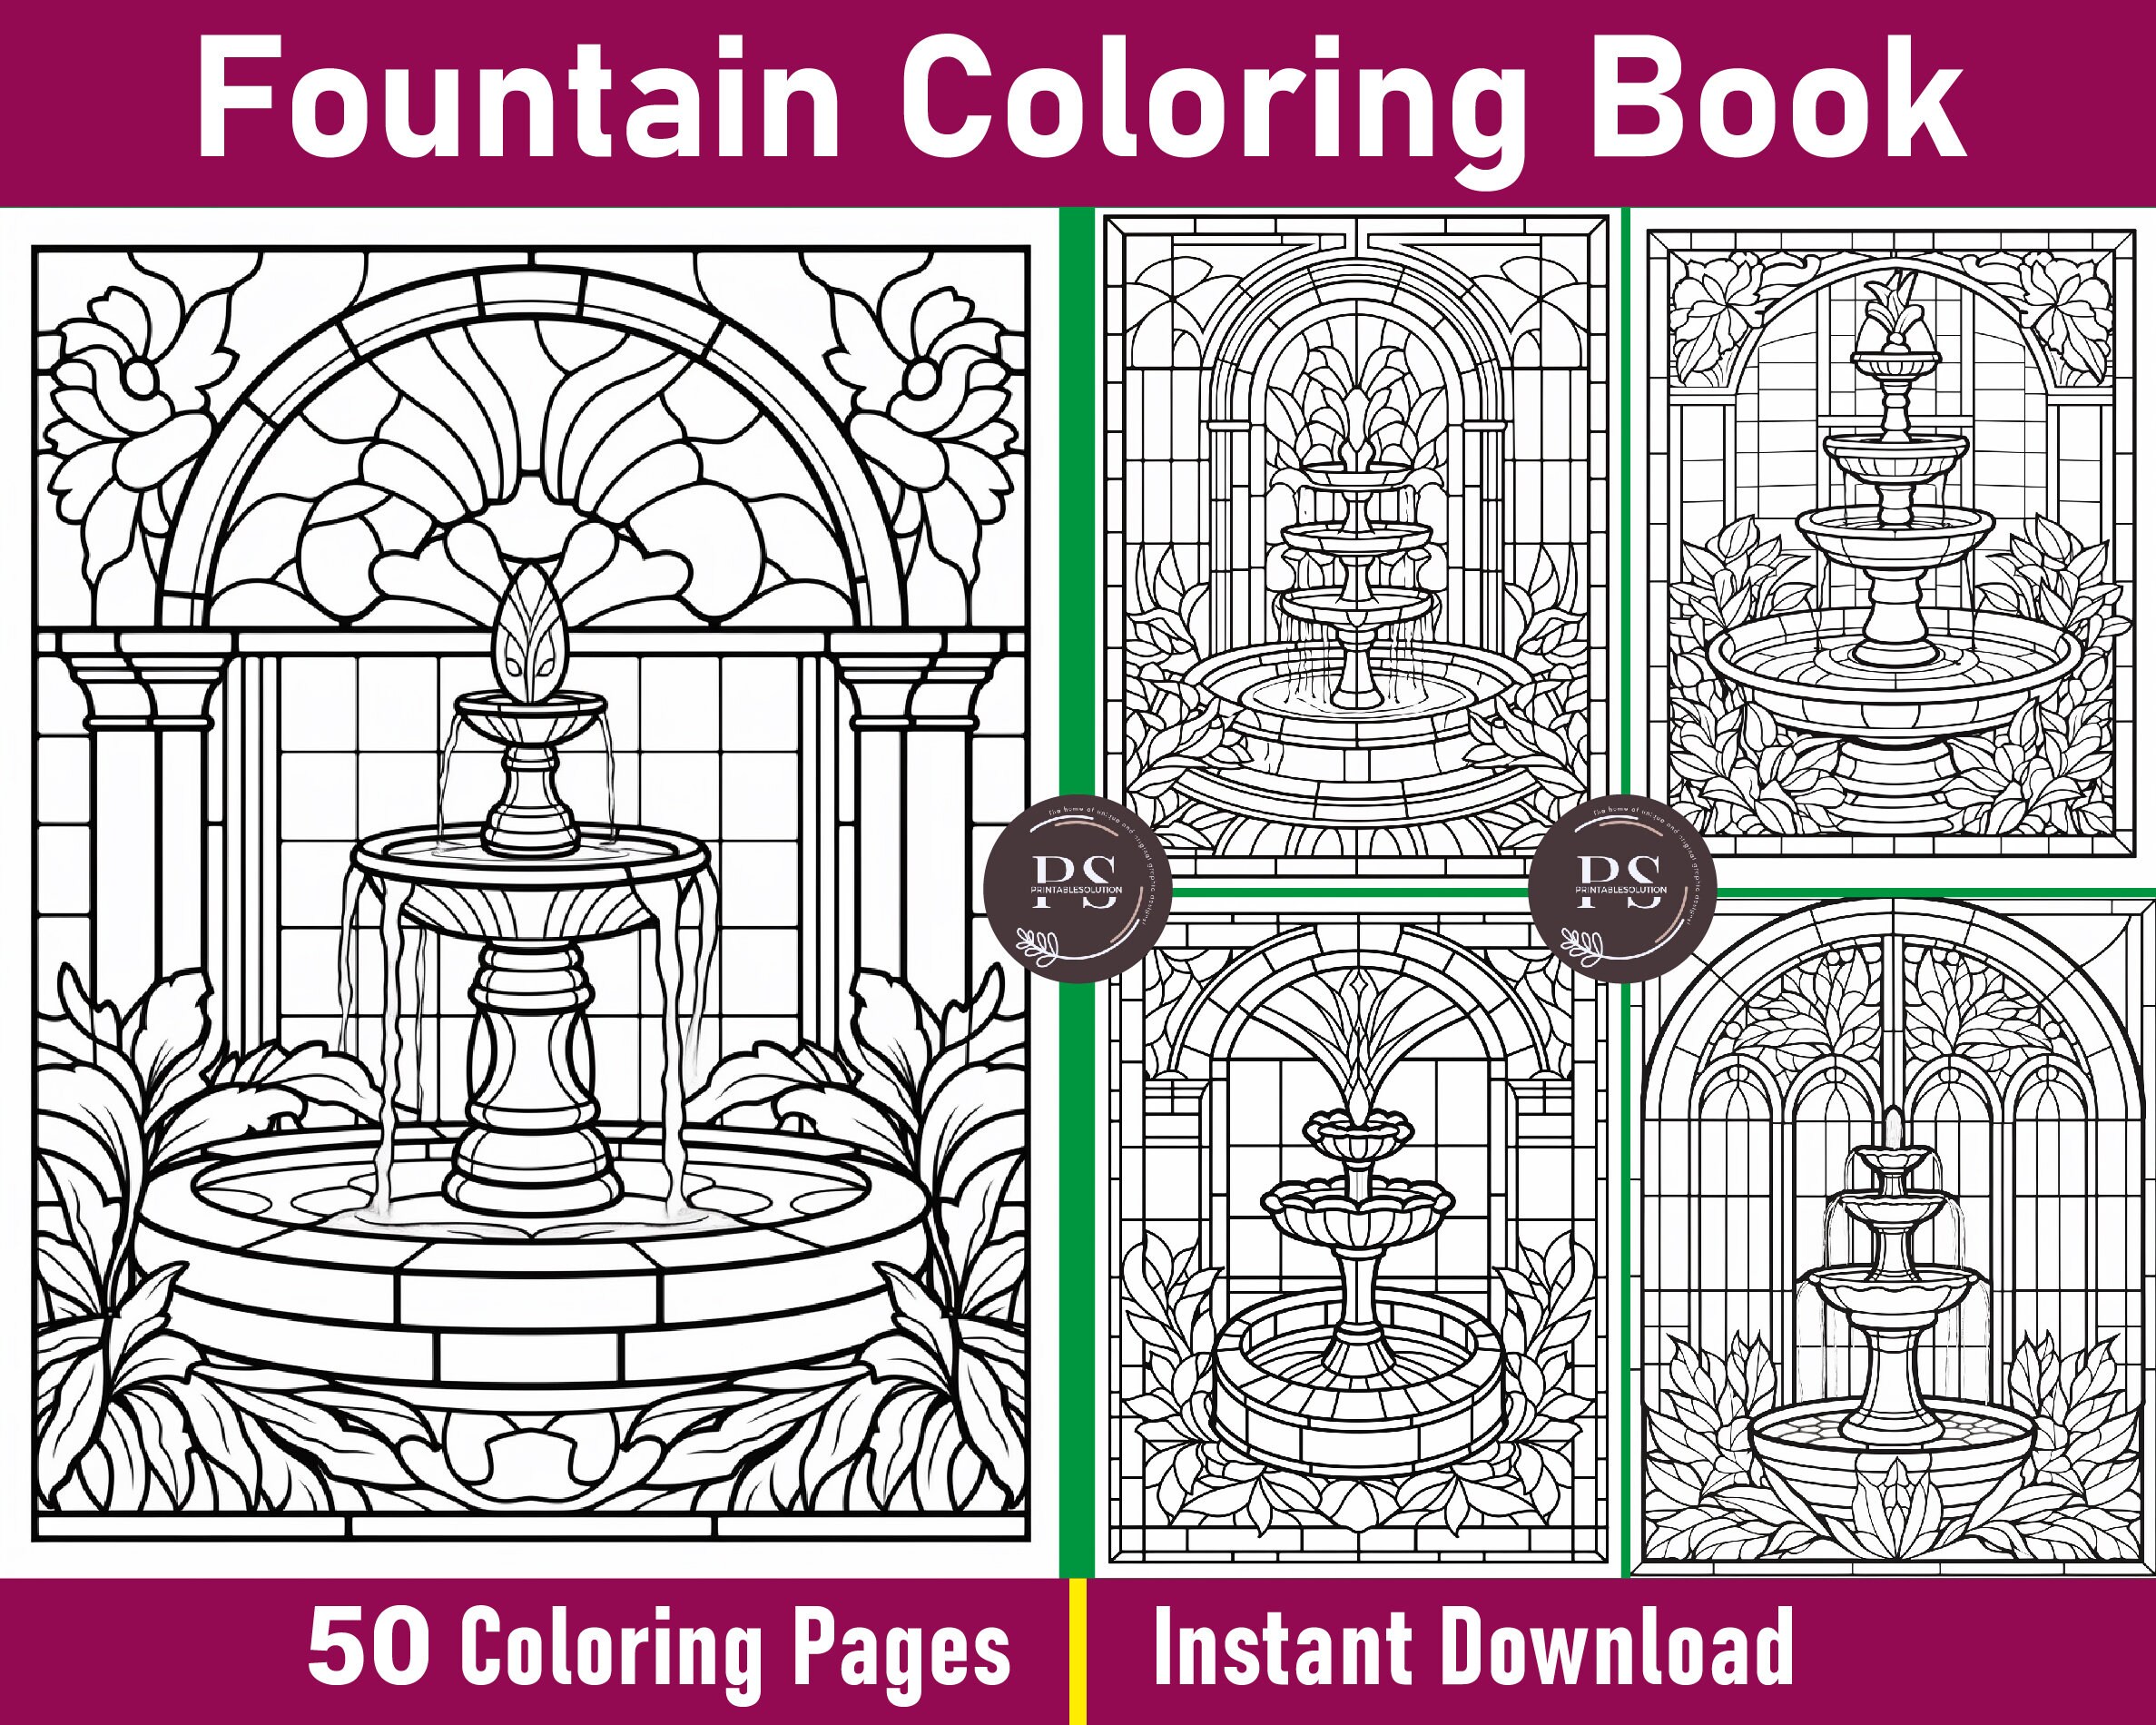 Fountain coloring pages beautiful scene coloring book